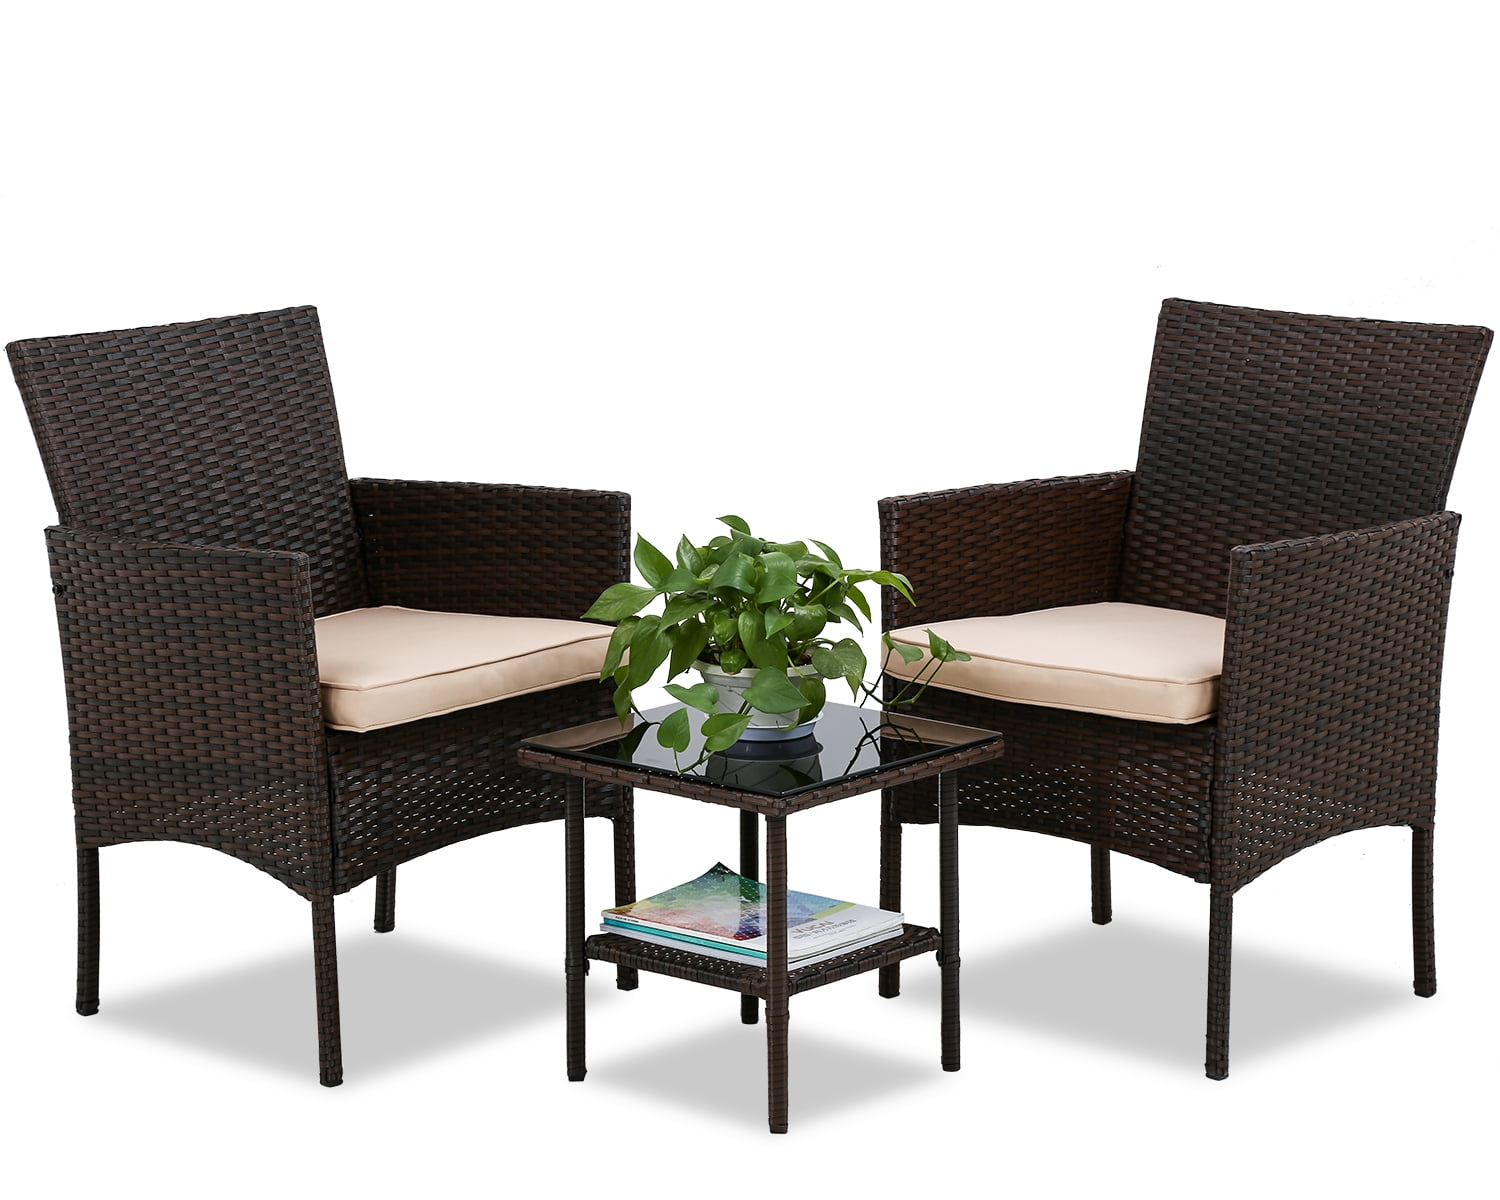 Fdw Outdoor Patio Furniture Sets 3 Pieces Set Wicker Bistro Rattan Chair Conversation Garden Porch For Yard And With Coffee Table Brown Com - Brown Rattan Patio Furniture Set